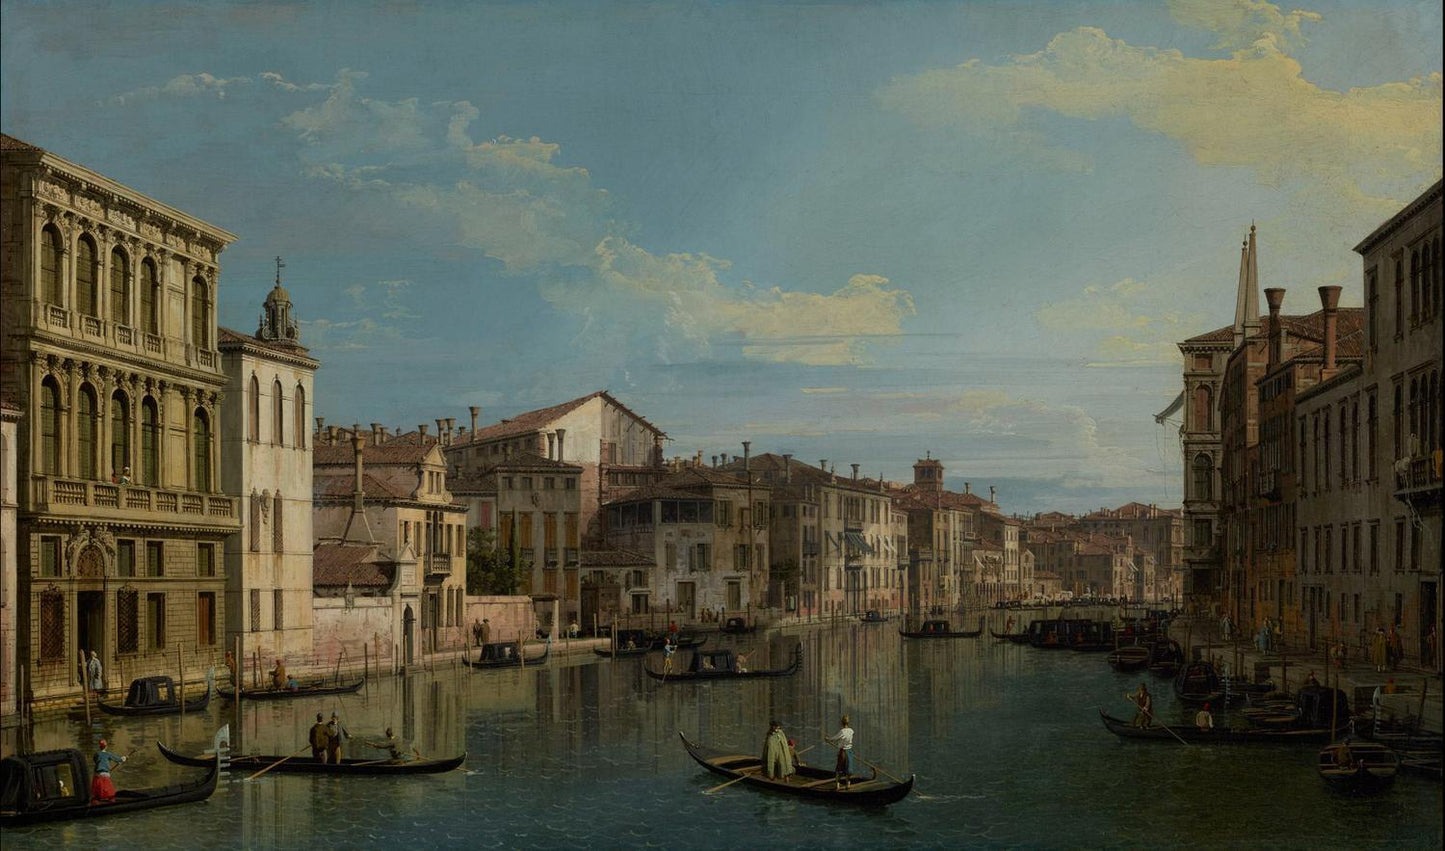 Grand Canal in Venice from Palazzo Flangini, Canaletto